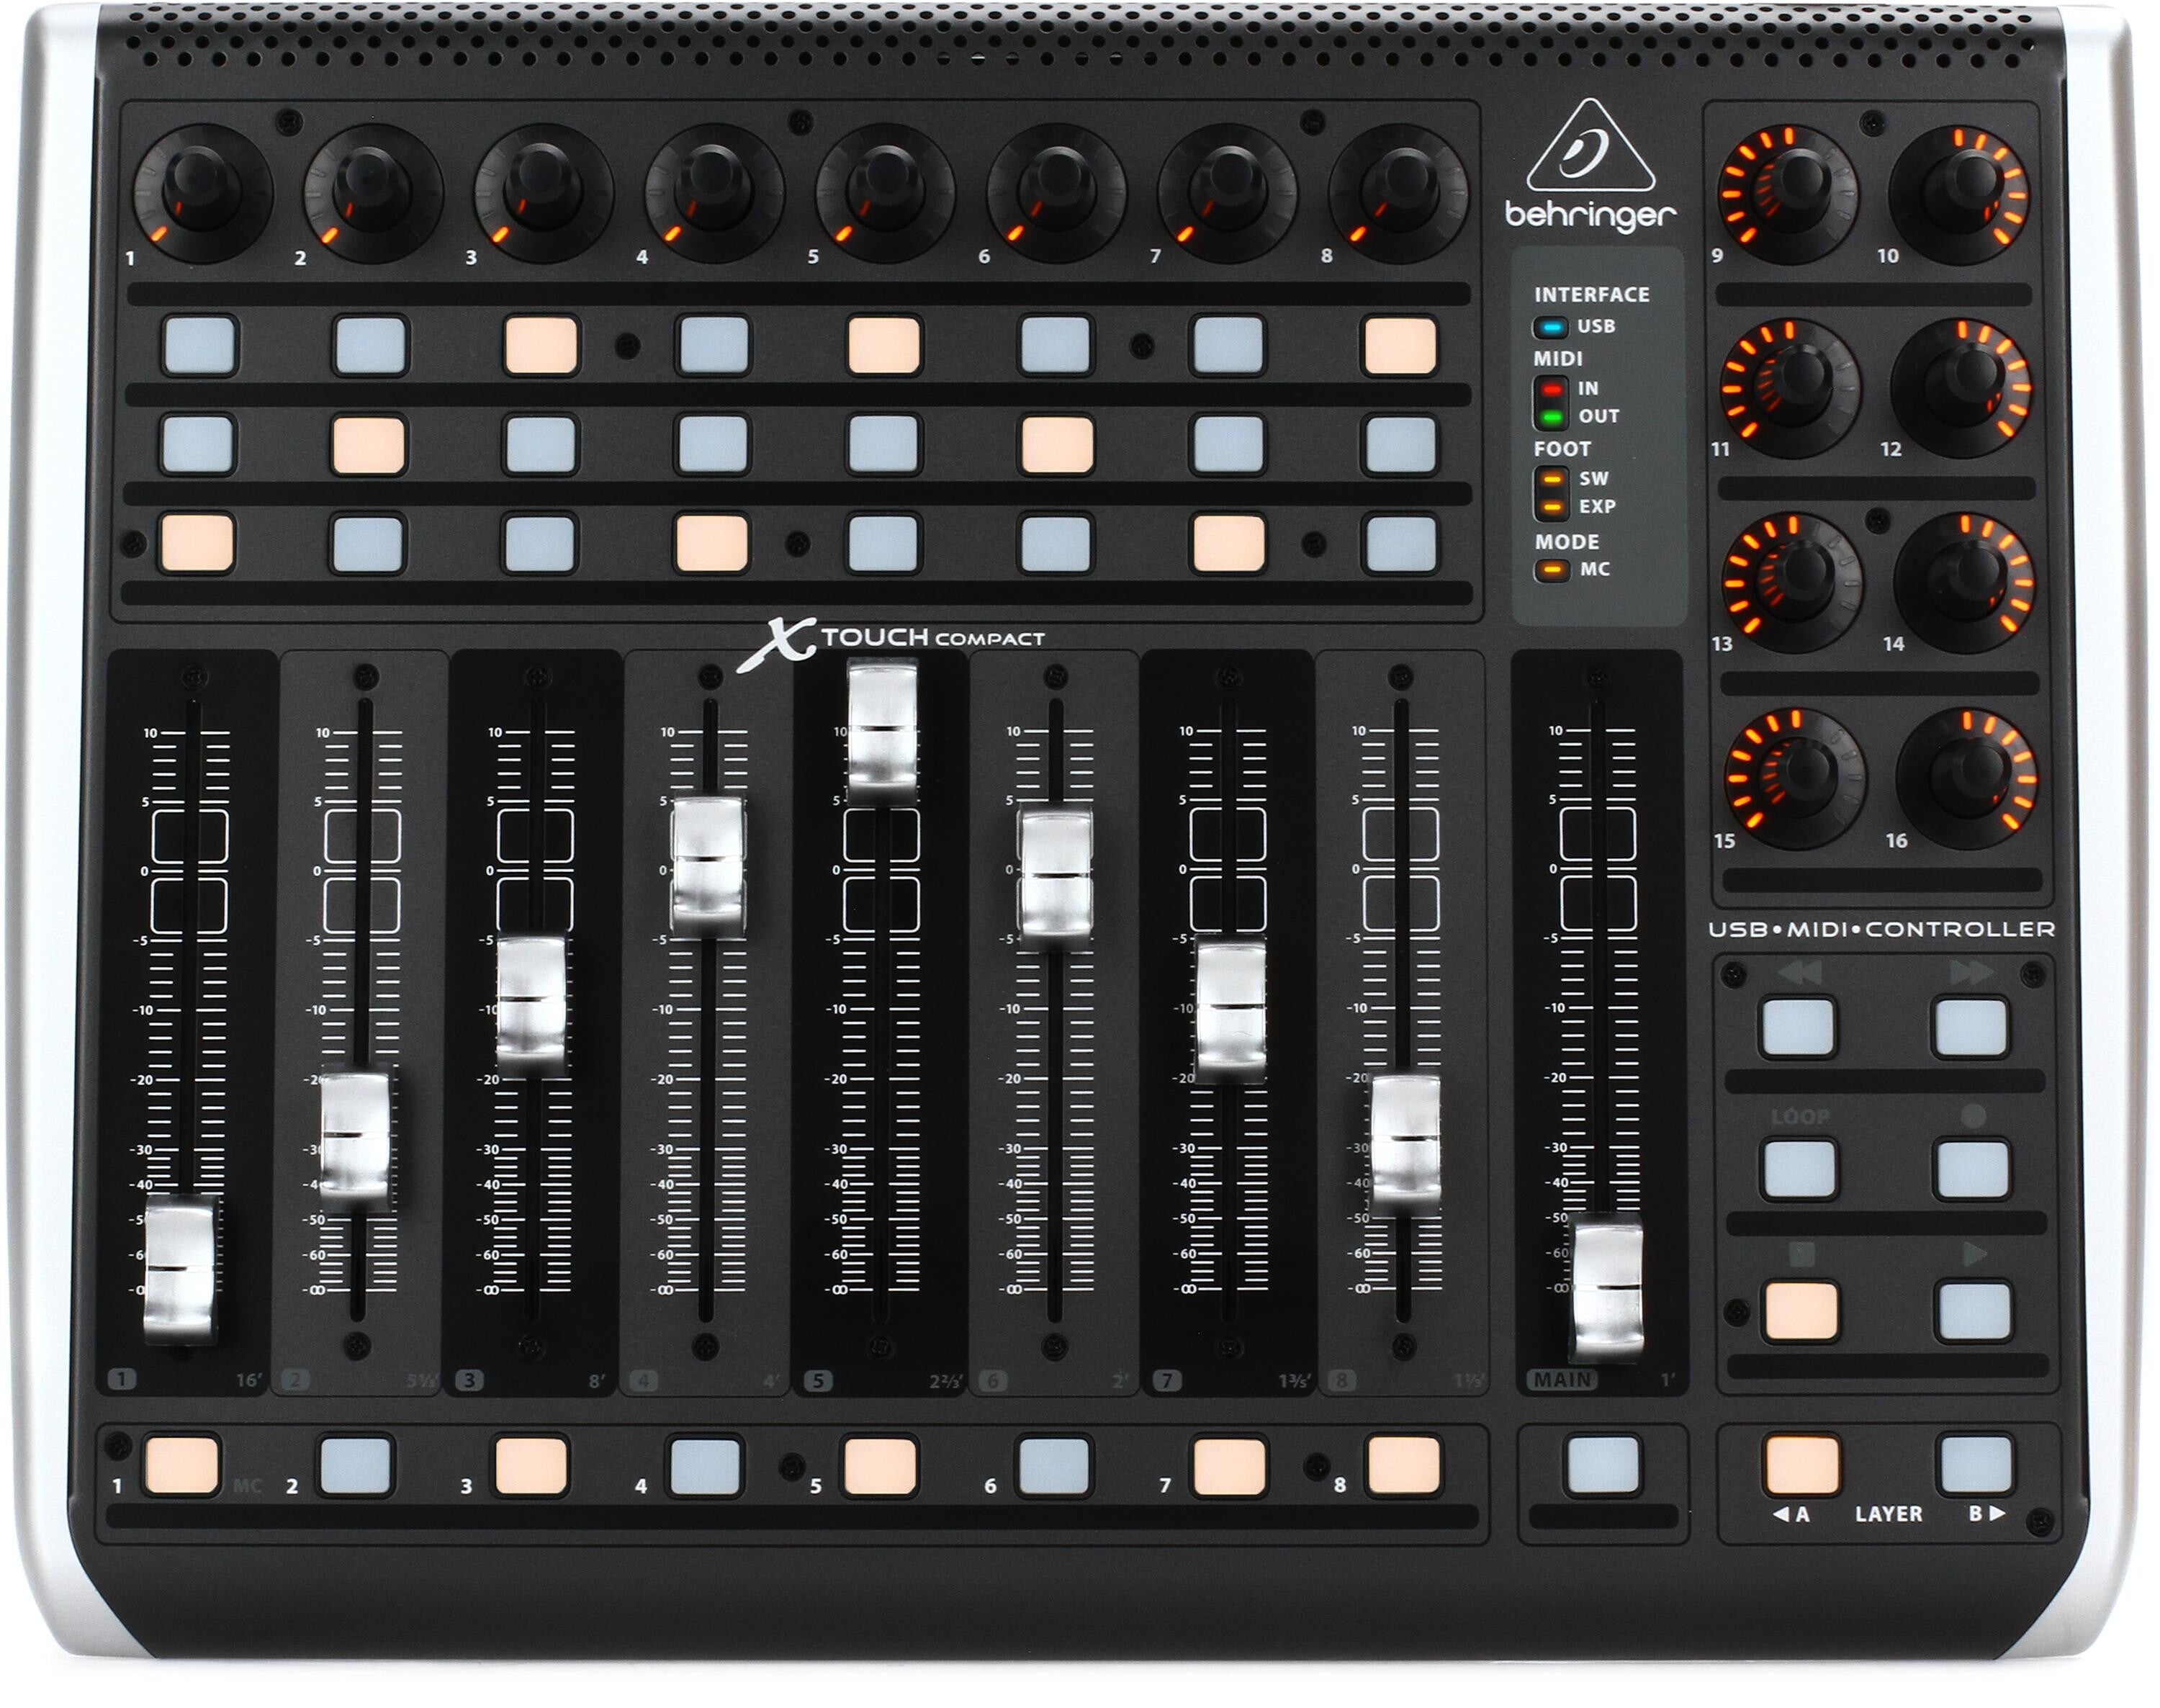 Universal　Behringer　Surface　Control　X-Touch　Compact　Sweetwater